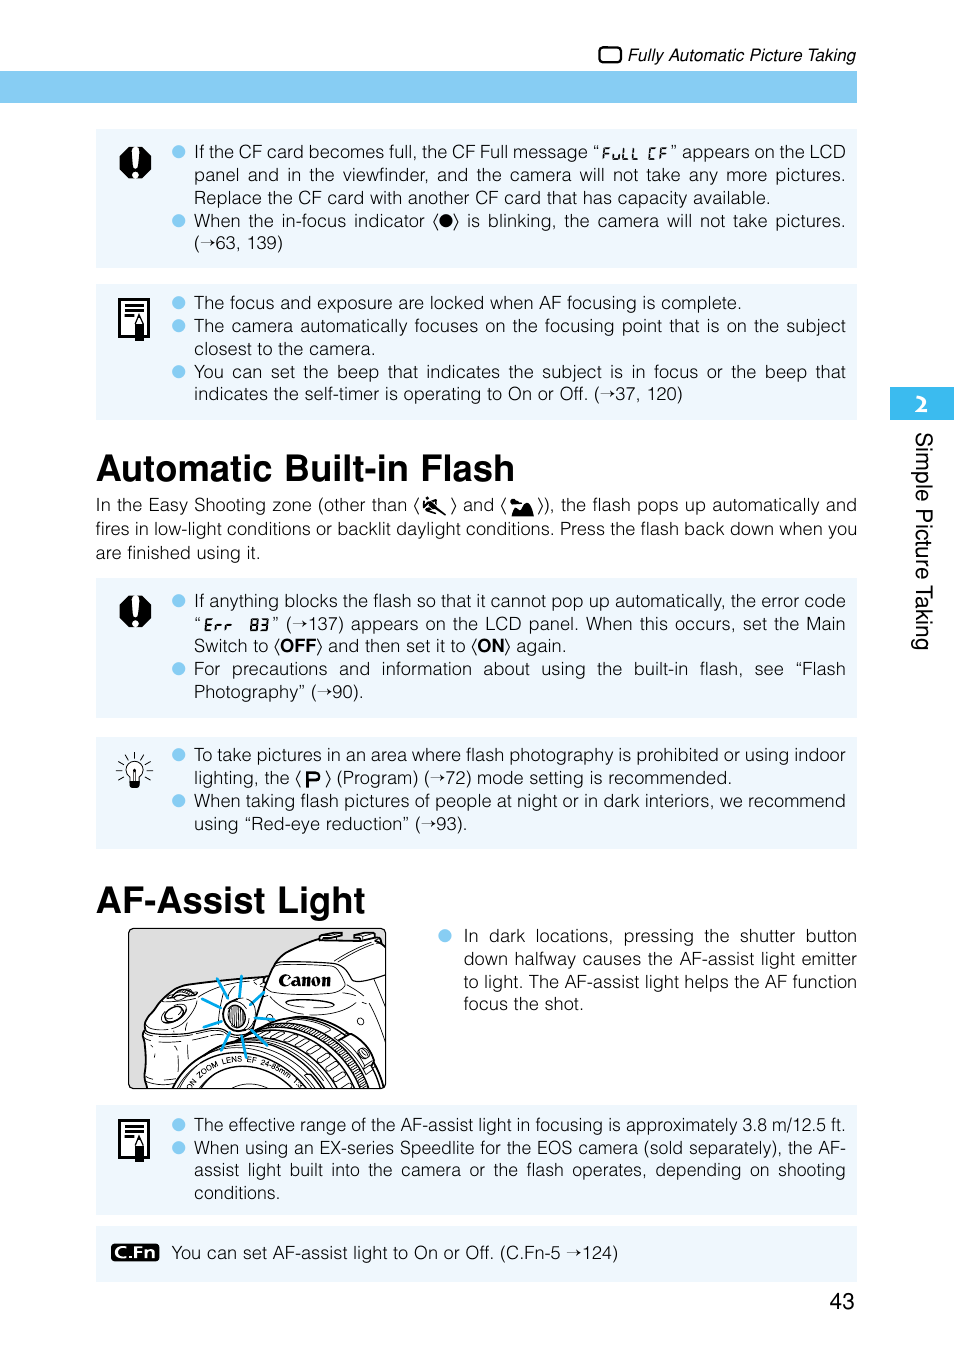 Automatic built-in flash, Af-assist light | Canon EOS D30 User Manual | Page 43 / 152